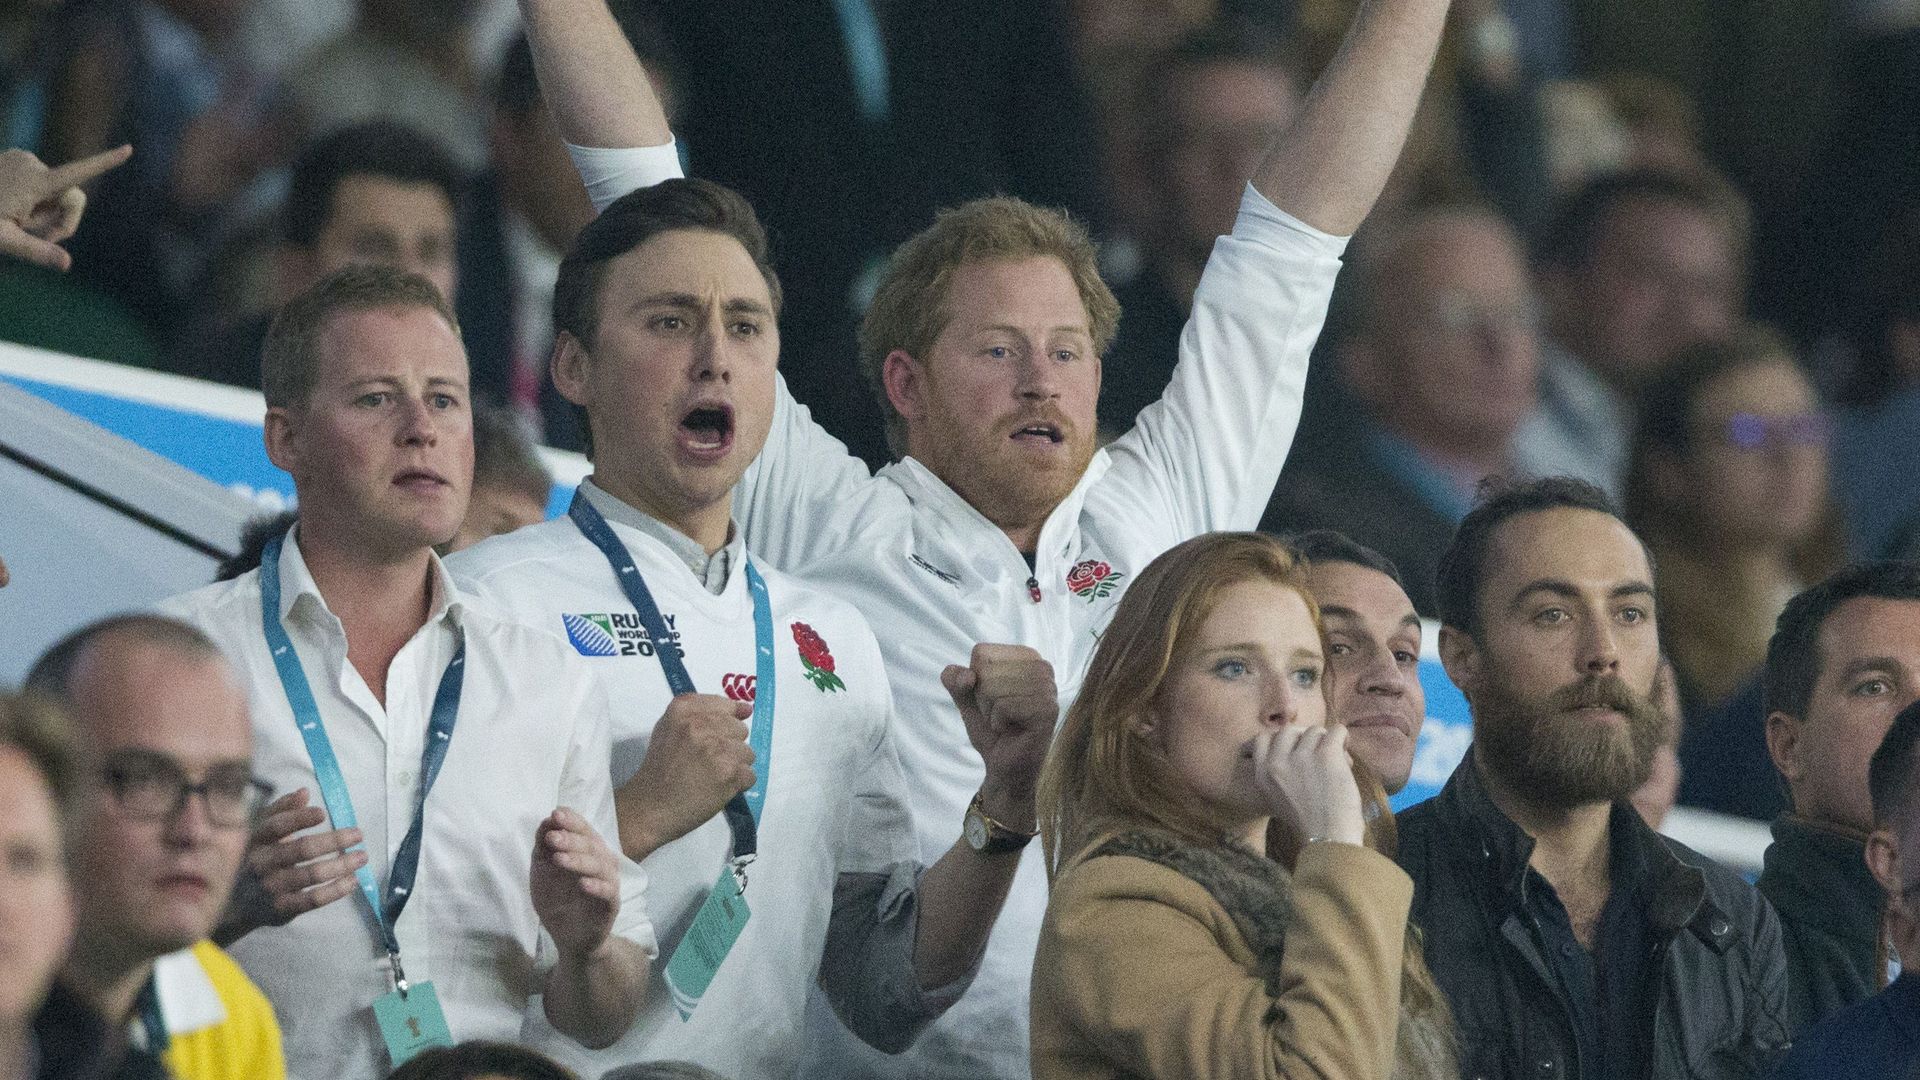 Charles Van Straubenzee and Prince Harry celebrating in the crowd of a rugby match